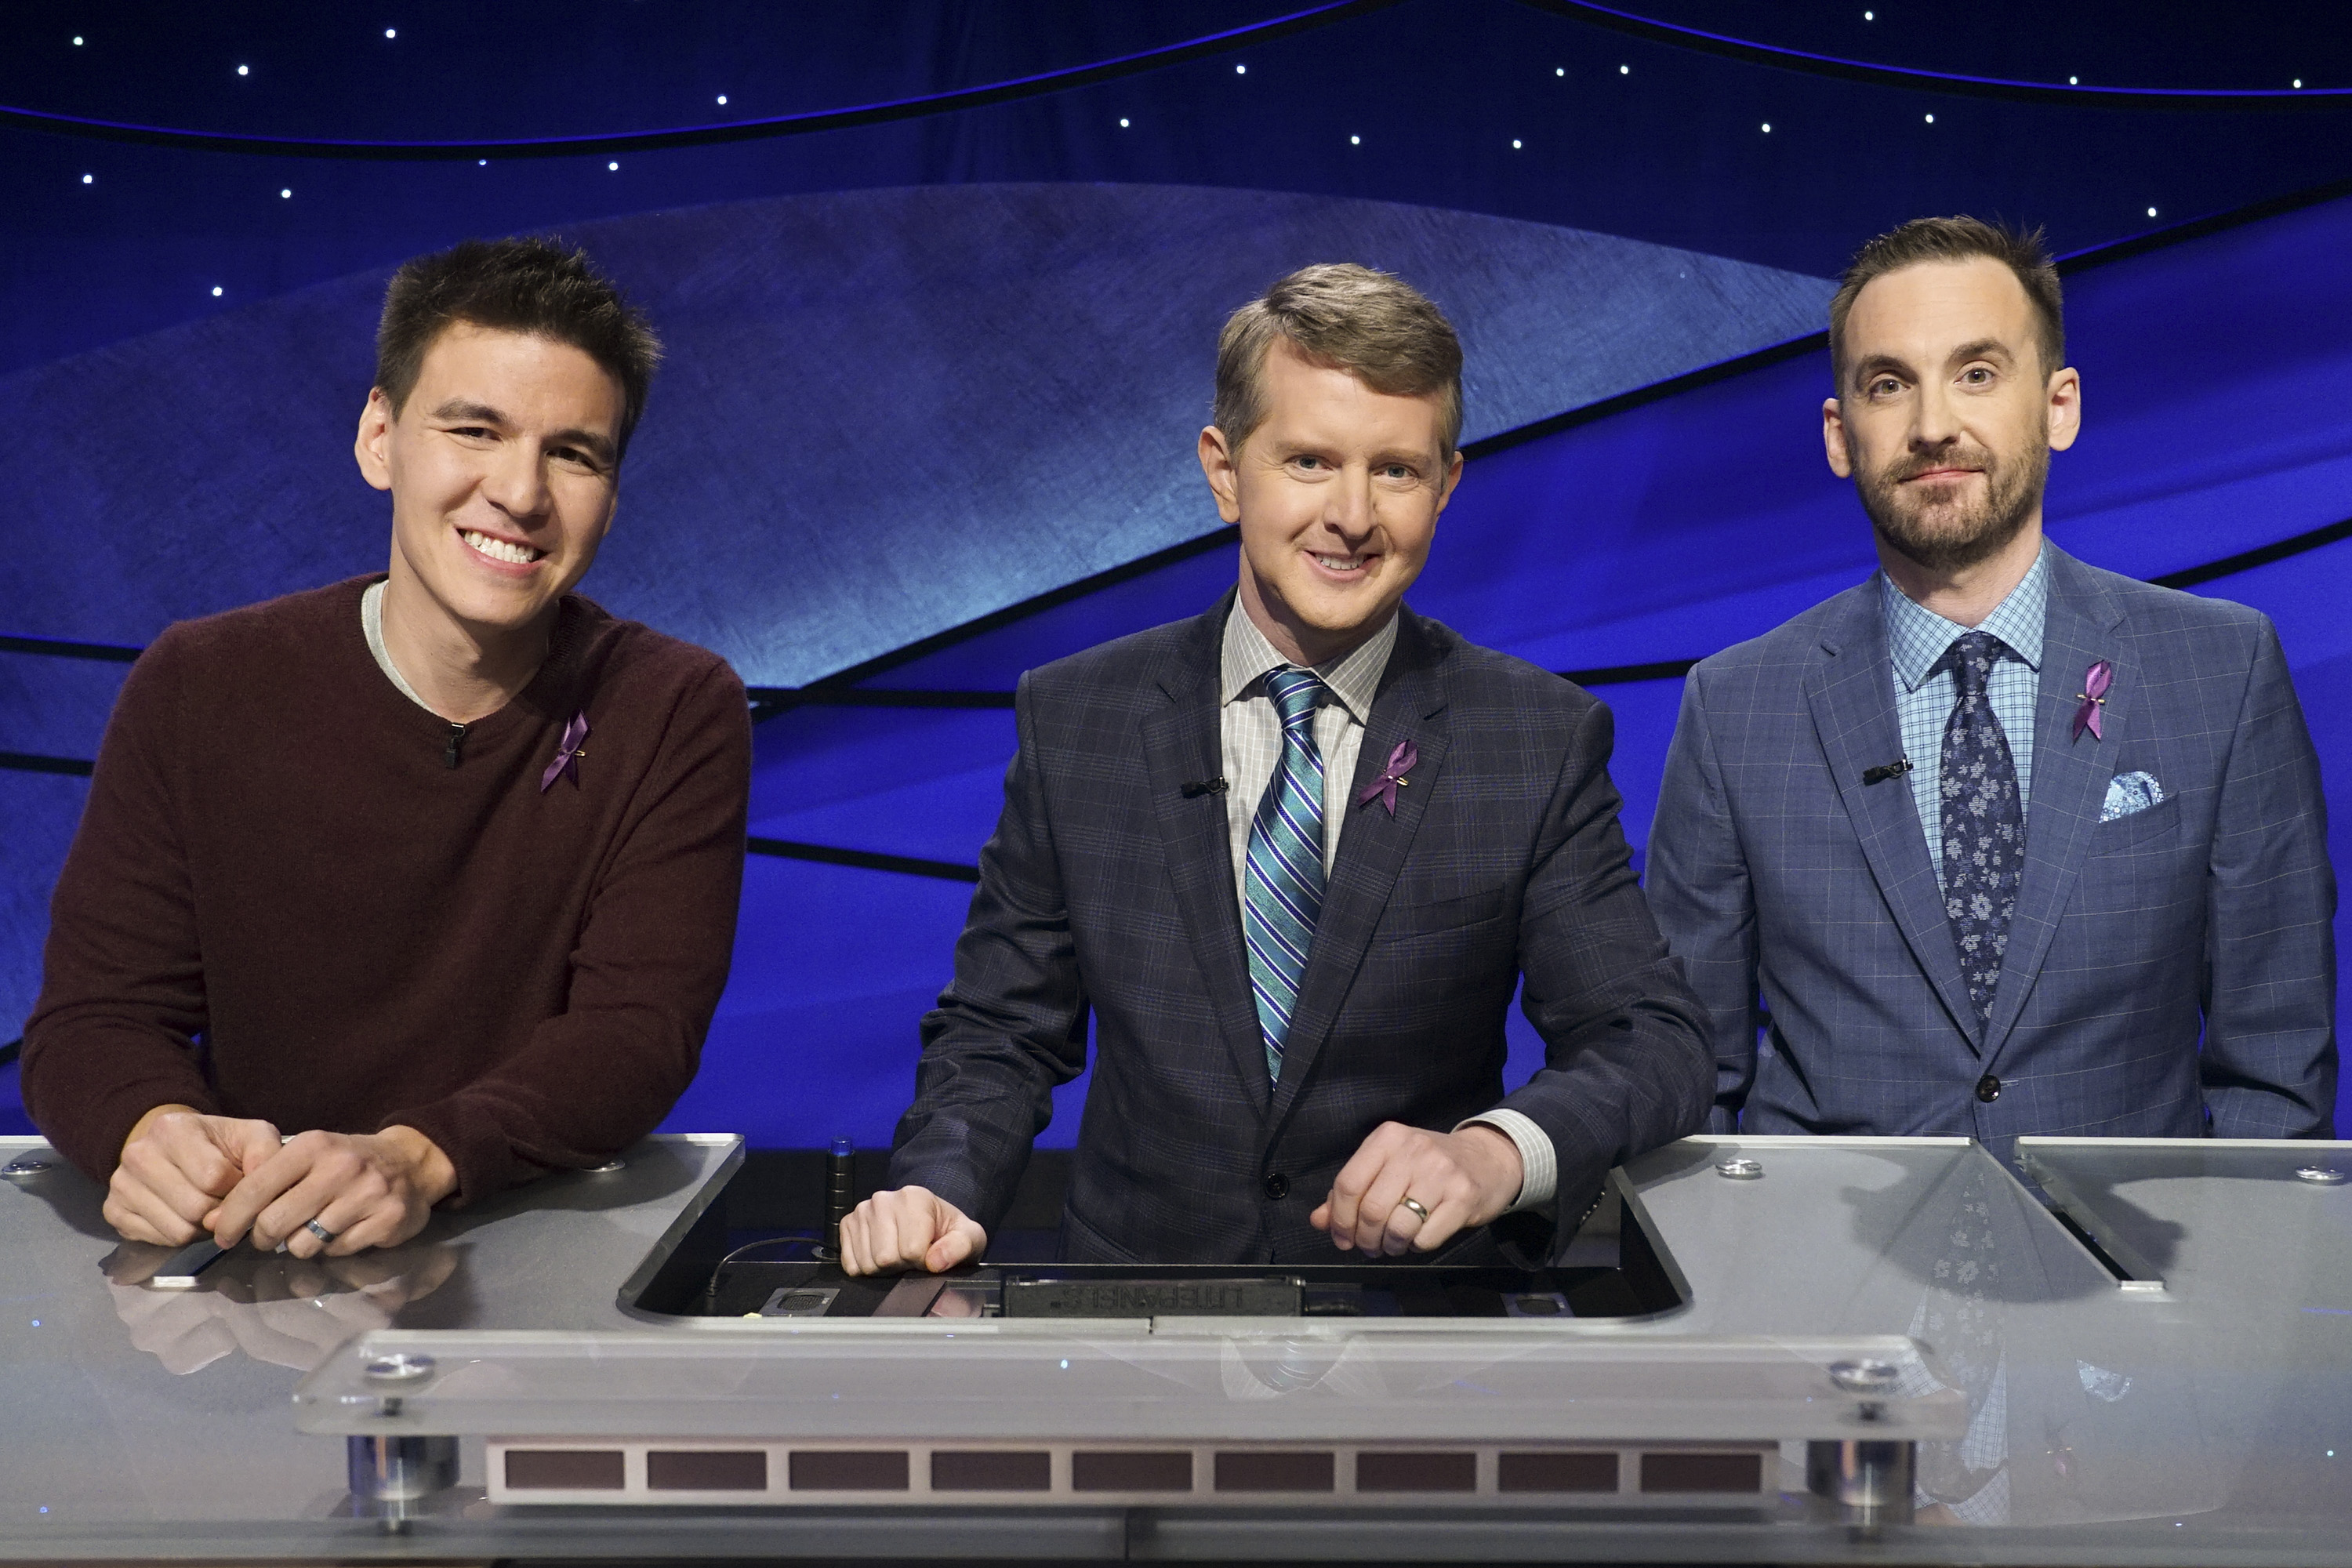 'Jeopardy!'s Greatest of All Time tournament in Jan. 2020